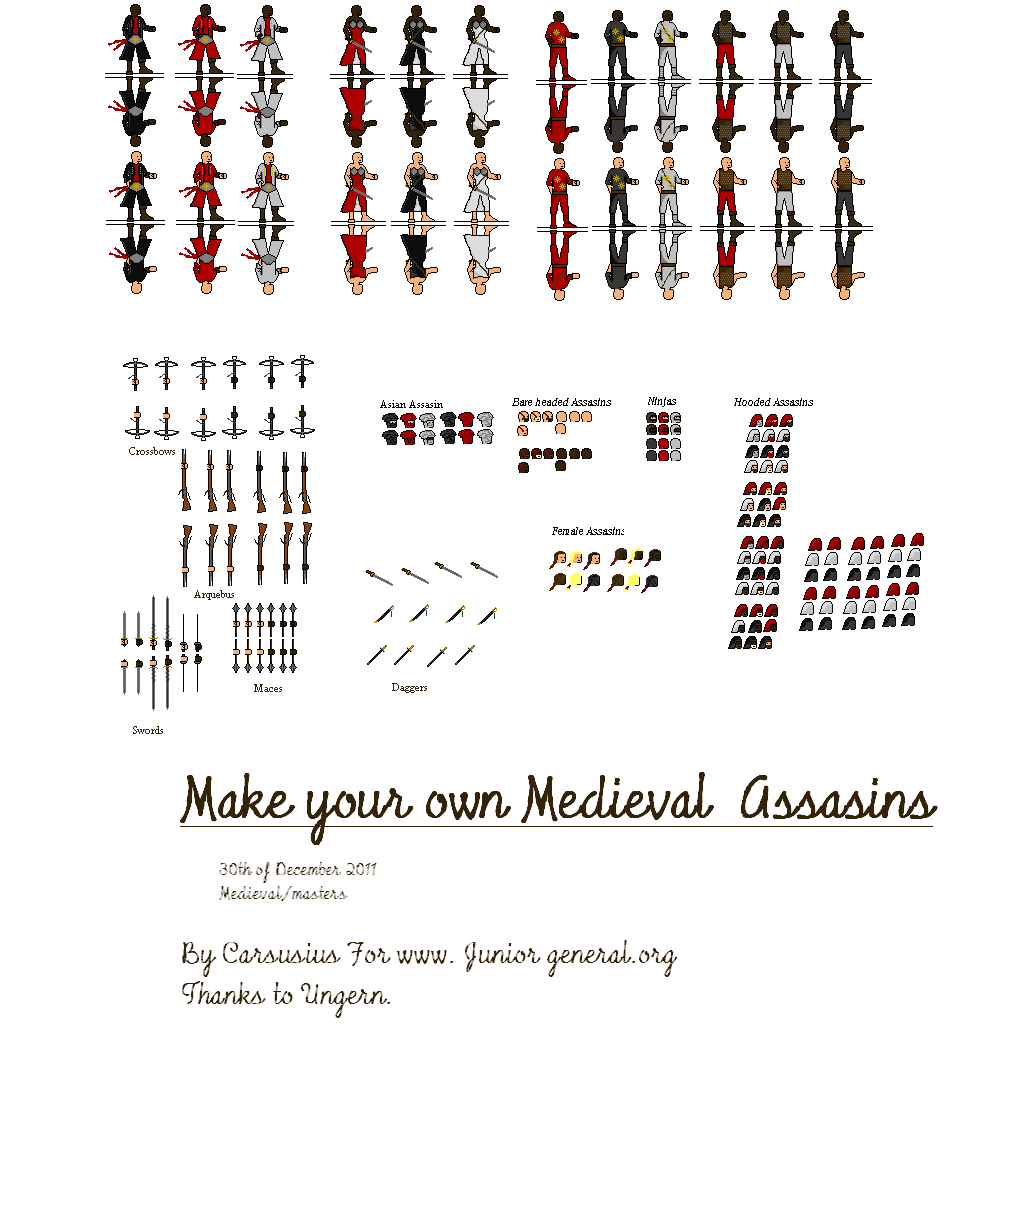 Make your own medieval Assasin